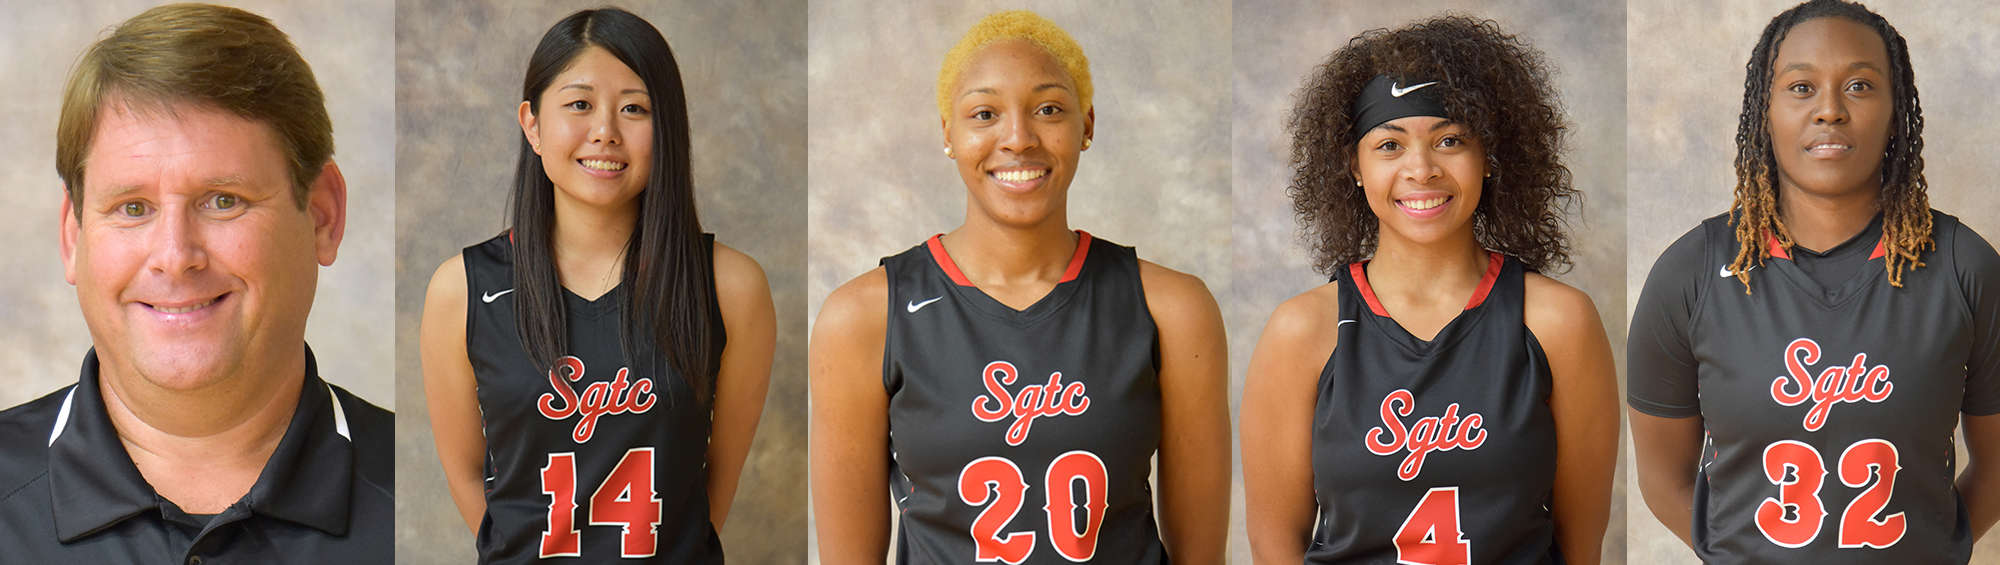 South Georgia Technical College’s Lady Jets head coach James Frey was selected as the GCAA Coach of the Year, Kanna Suzuki, 14, was the Freshman of the Year, Desiree Corbin, 20, and Camille Coleman, 4, were first team All-Conference players and Shaineequah Fluellyn, 32, was a GCAA 2nd team All-Conference player. Shown are headshots of each player and coach.